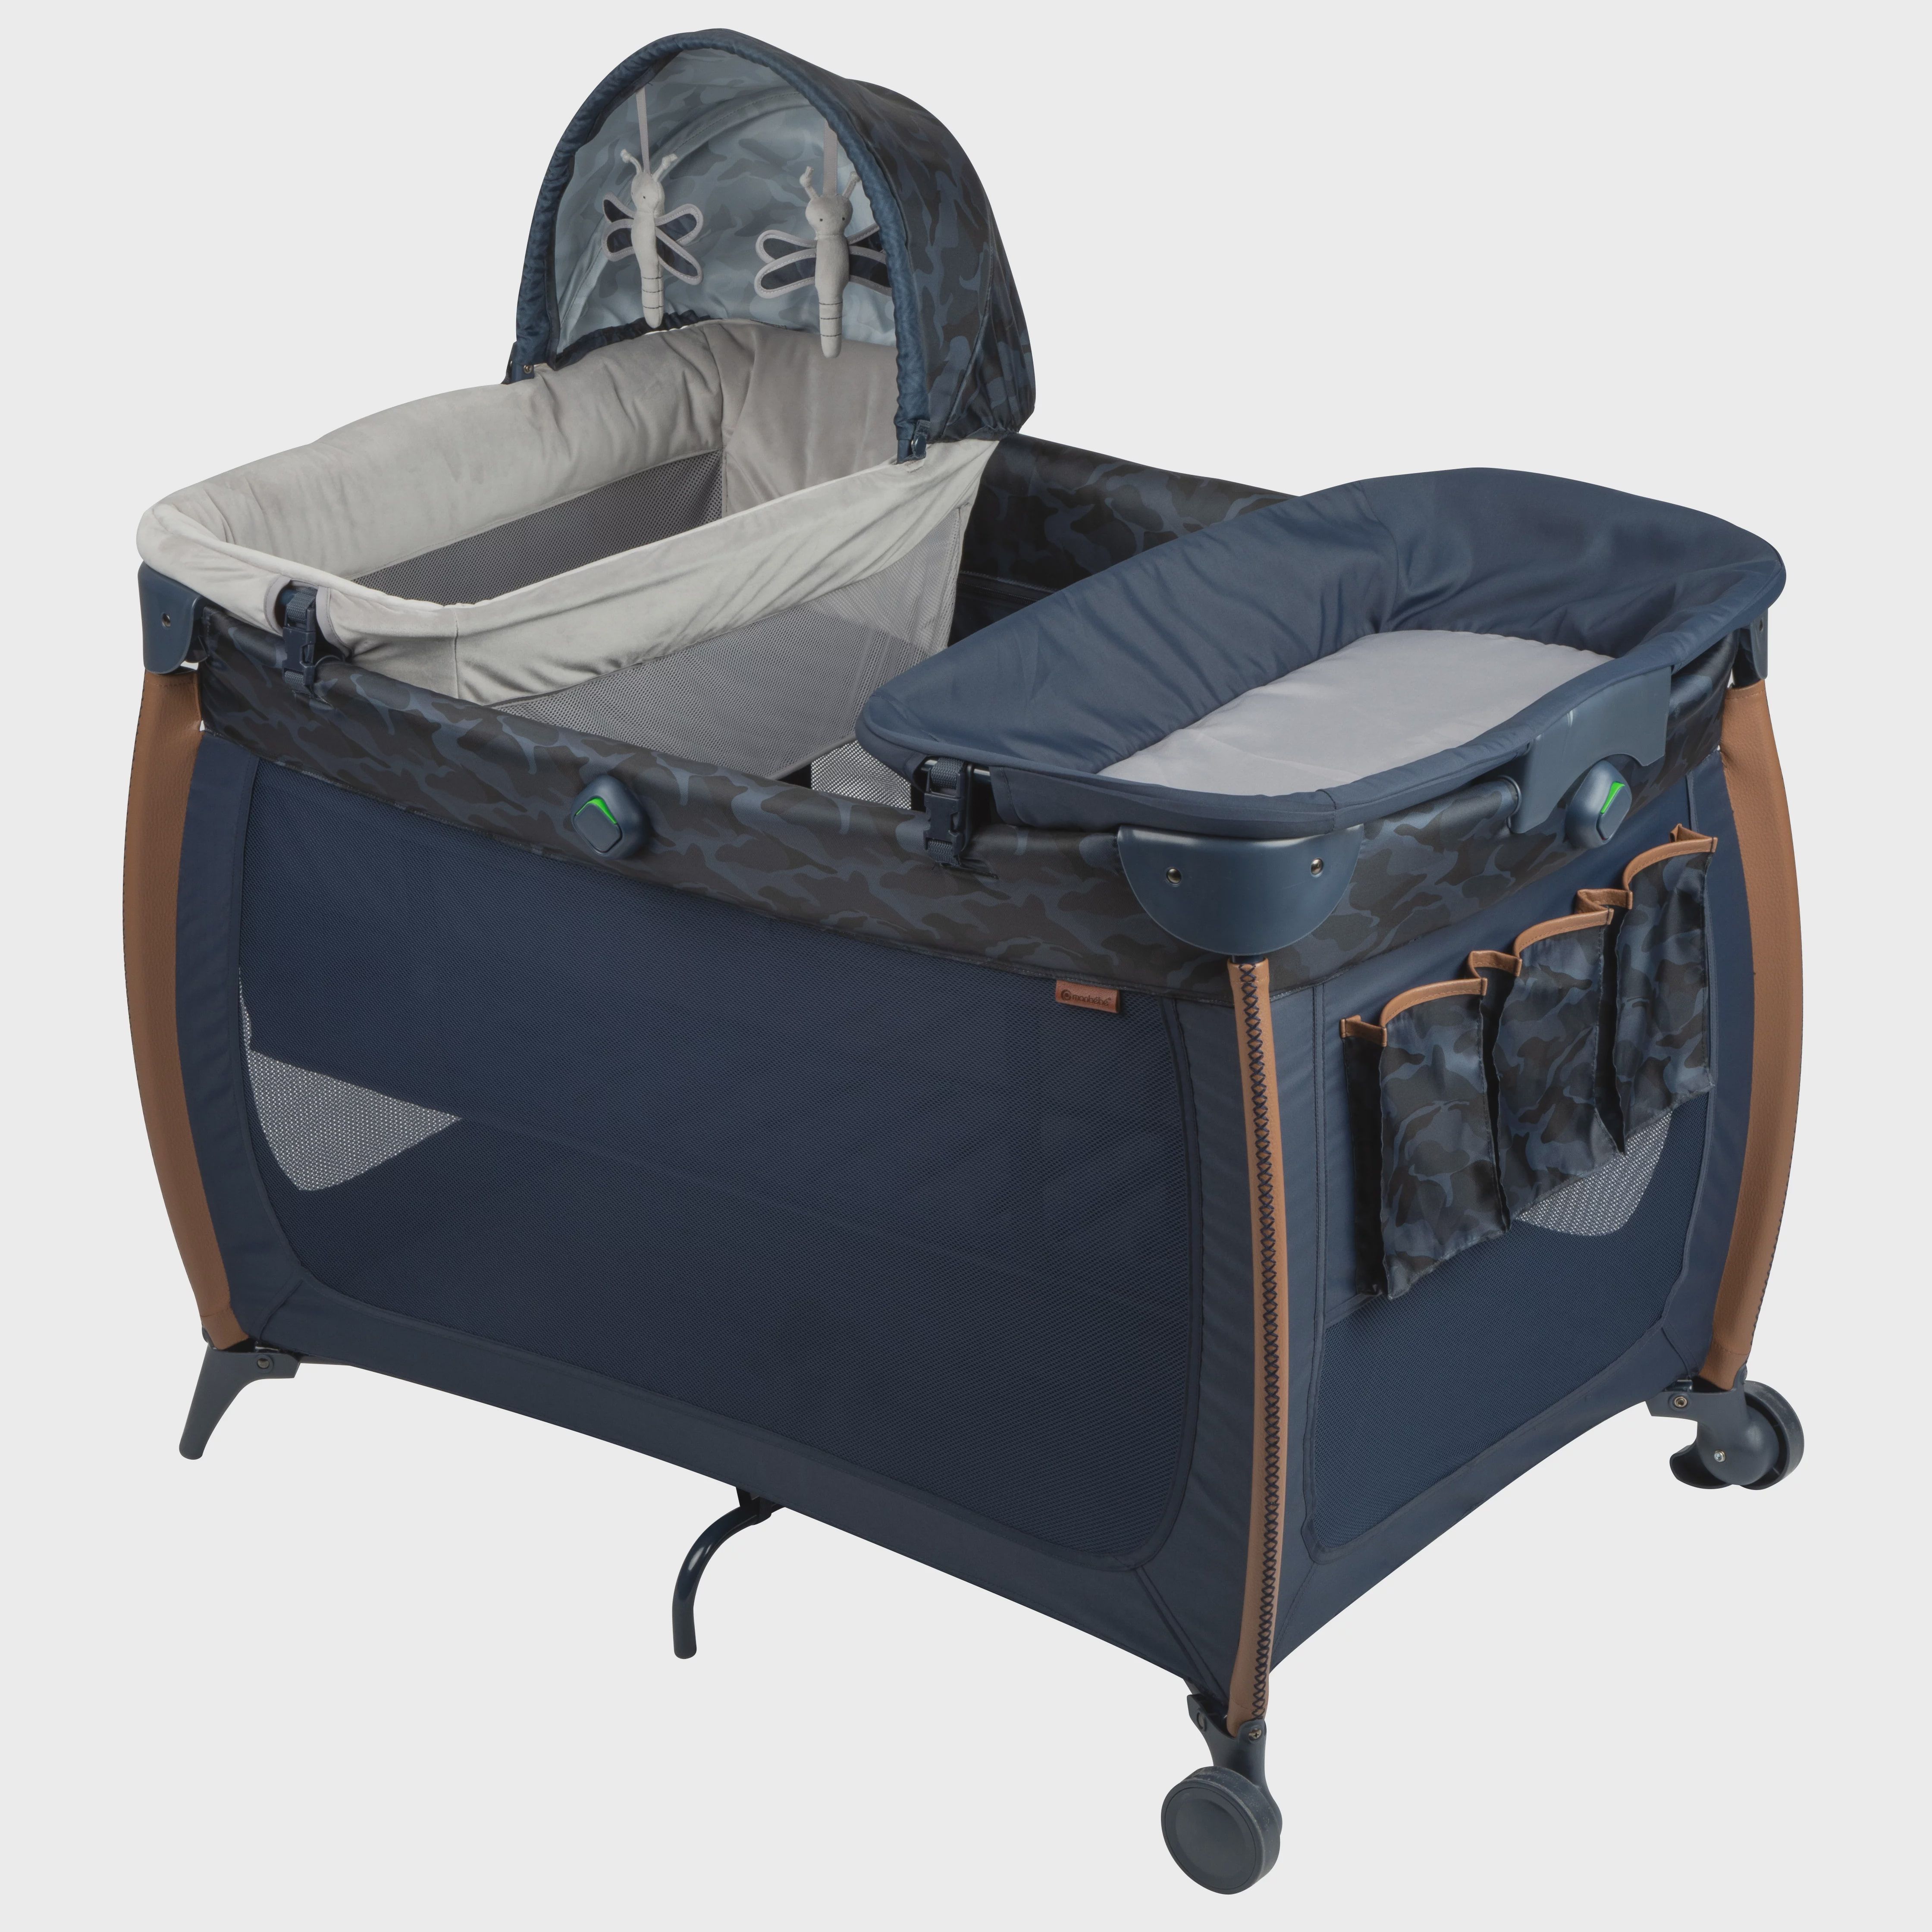 Flex Deluxe Portable Playard with Bassinet/Changer